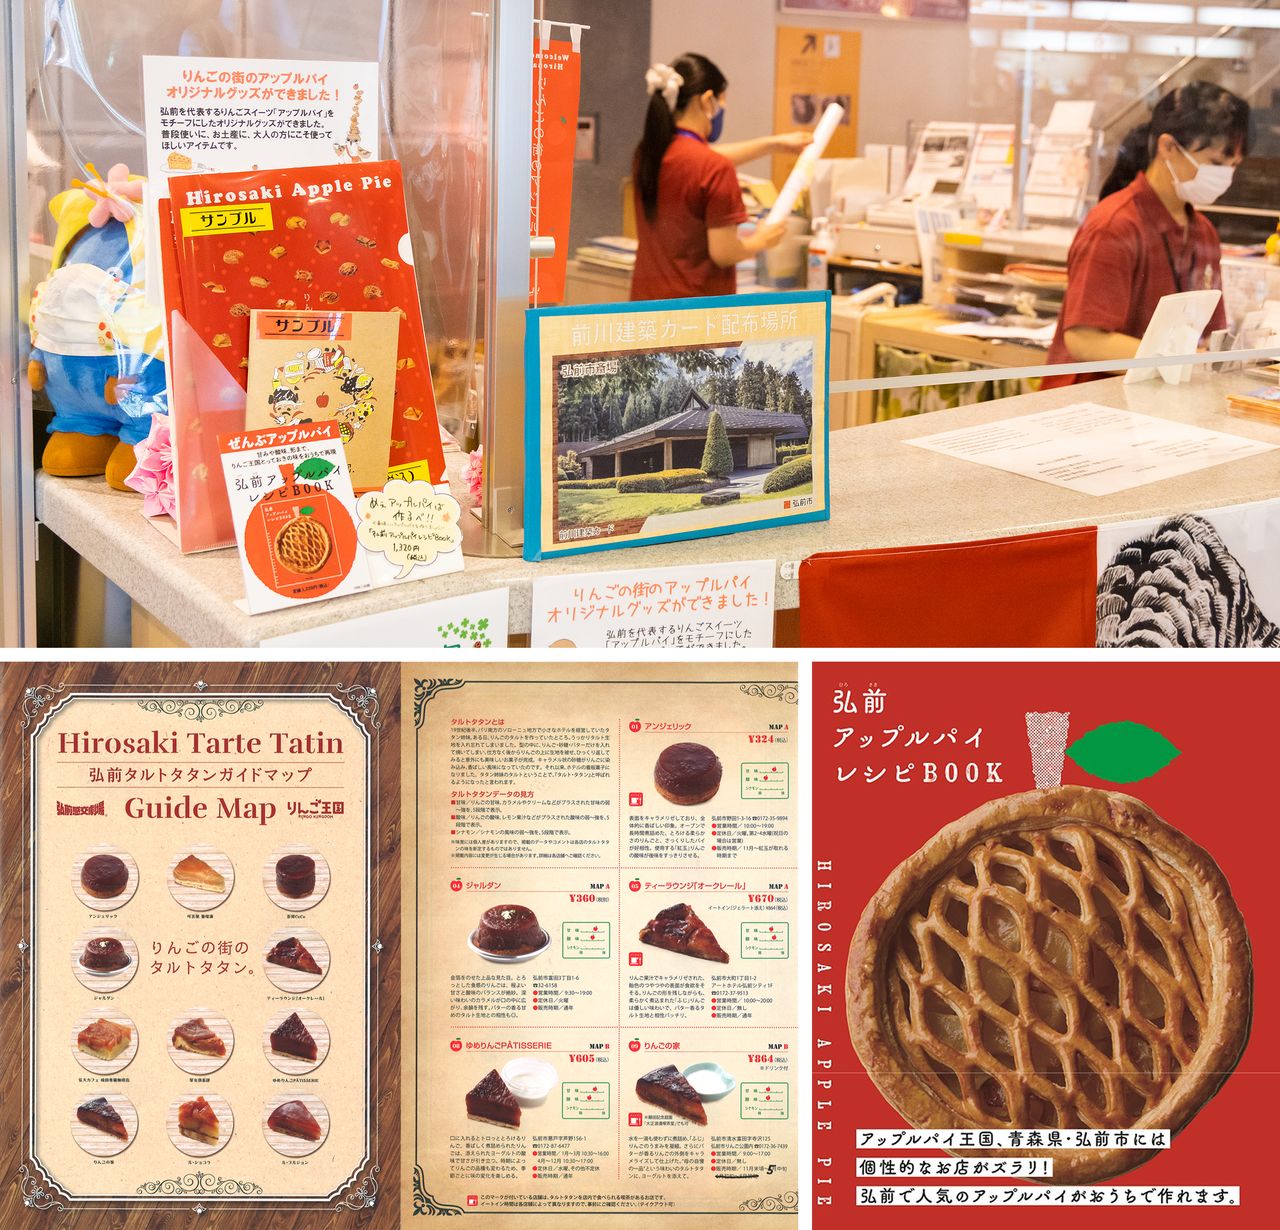 Clockwise from top: Map-related goods on display at the Sightseeing Information Center; the cover of the Hirosaki Apple Pie Recipe Book; and the Hirosaki Tarte Tatin Guide Map.